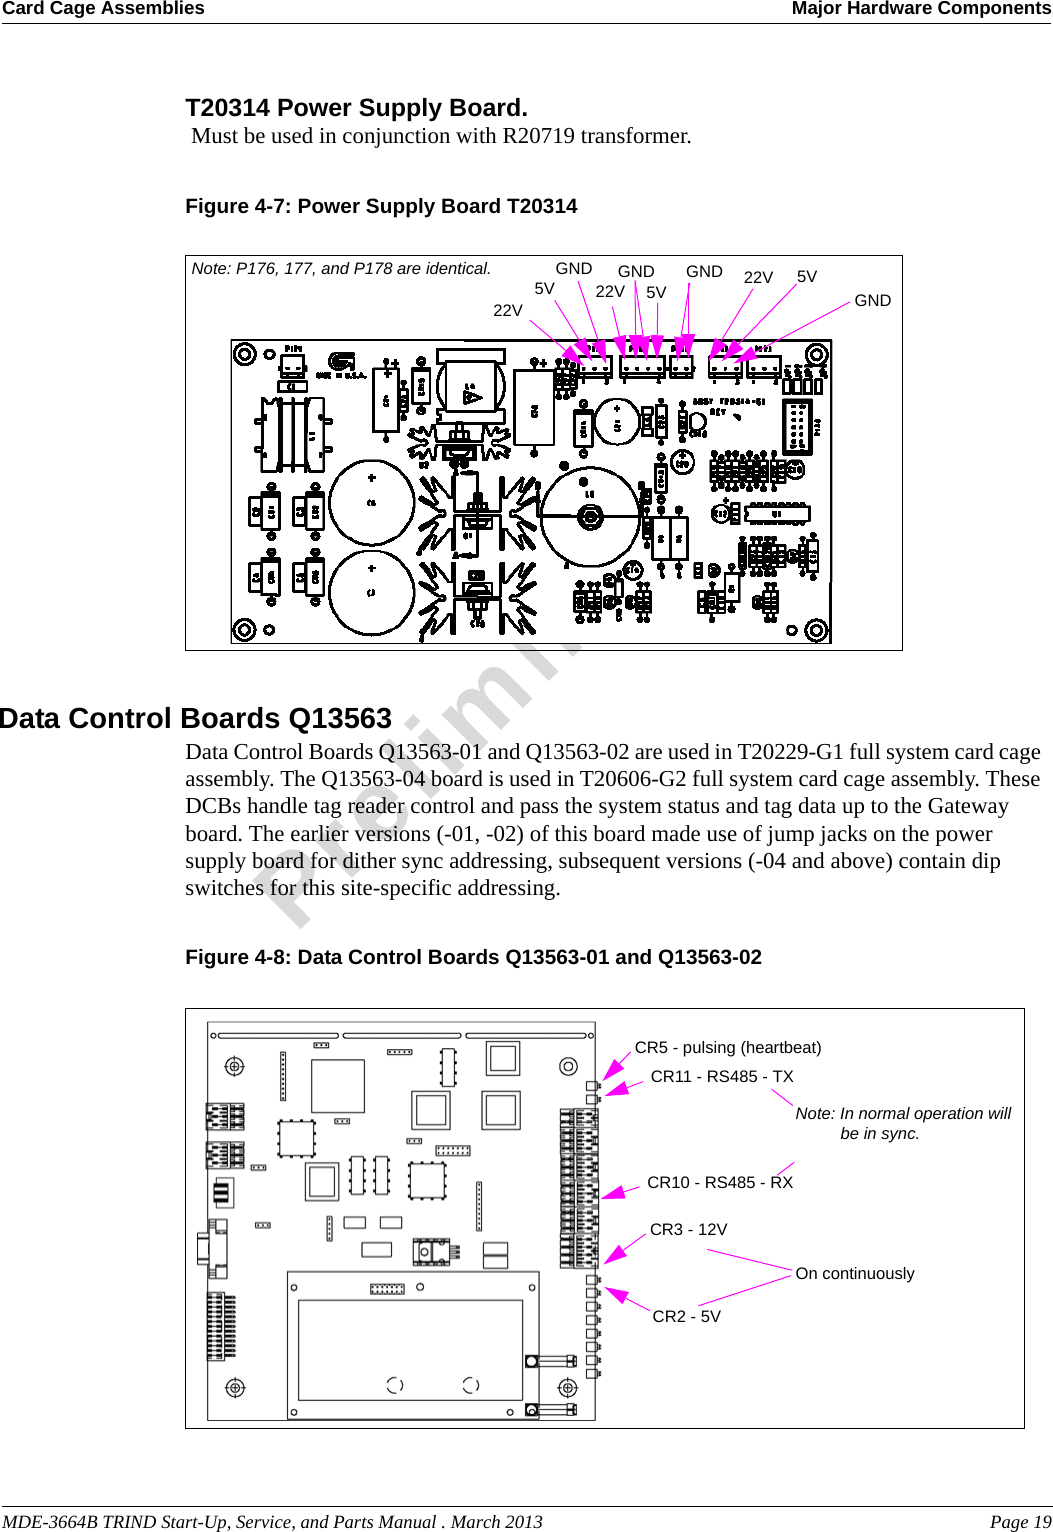 MDE-3664B TRIND Start-Up, Service, and Parts Manual . March 2013 Page 19Card Cage Assemblies Major Hardware ComponentsPreliminaryT20314 Power Supply Board. Must be used in conjunction with R20719 transformer.Figure 4-7: Power Supply Board T203145VGND22VGND GND5V 22VGNDNote: P176, 177, and P178 are identical.22V5VData Control Boards Q13563Data Control Boards Q13563-01 and Q13563-02 are used in T20229-G1 full system card cage assembly. The Q13563-04 board is used in T20606-G2 full system card cage assembly. These DCBs handle tag reader control and pass the system status and tag data up to the Gateway board. The earlier versions (-01, -02) of this board made use of jump jacks on the power supply board for dither sync addressing, subsequent versions (-04 and above) contain dip switches for this site-specific addressing.Figure 4-8: Data Control Boards Q13563-01 and Q13563-02CR5 - pulsing (heartbeat) CR11 - RS485 - TXCR10 - RS485 - RXNote: In normal operation will be in sync.CR3 - 12VCR2 - 5VOn continuously